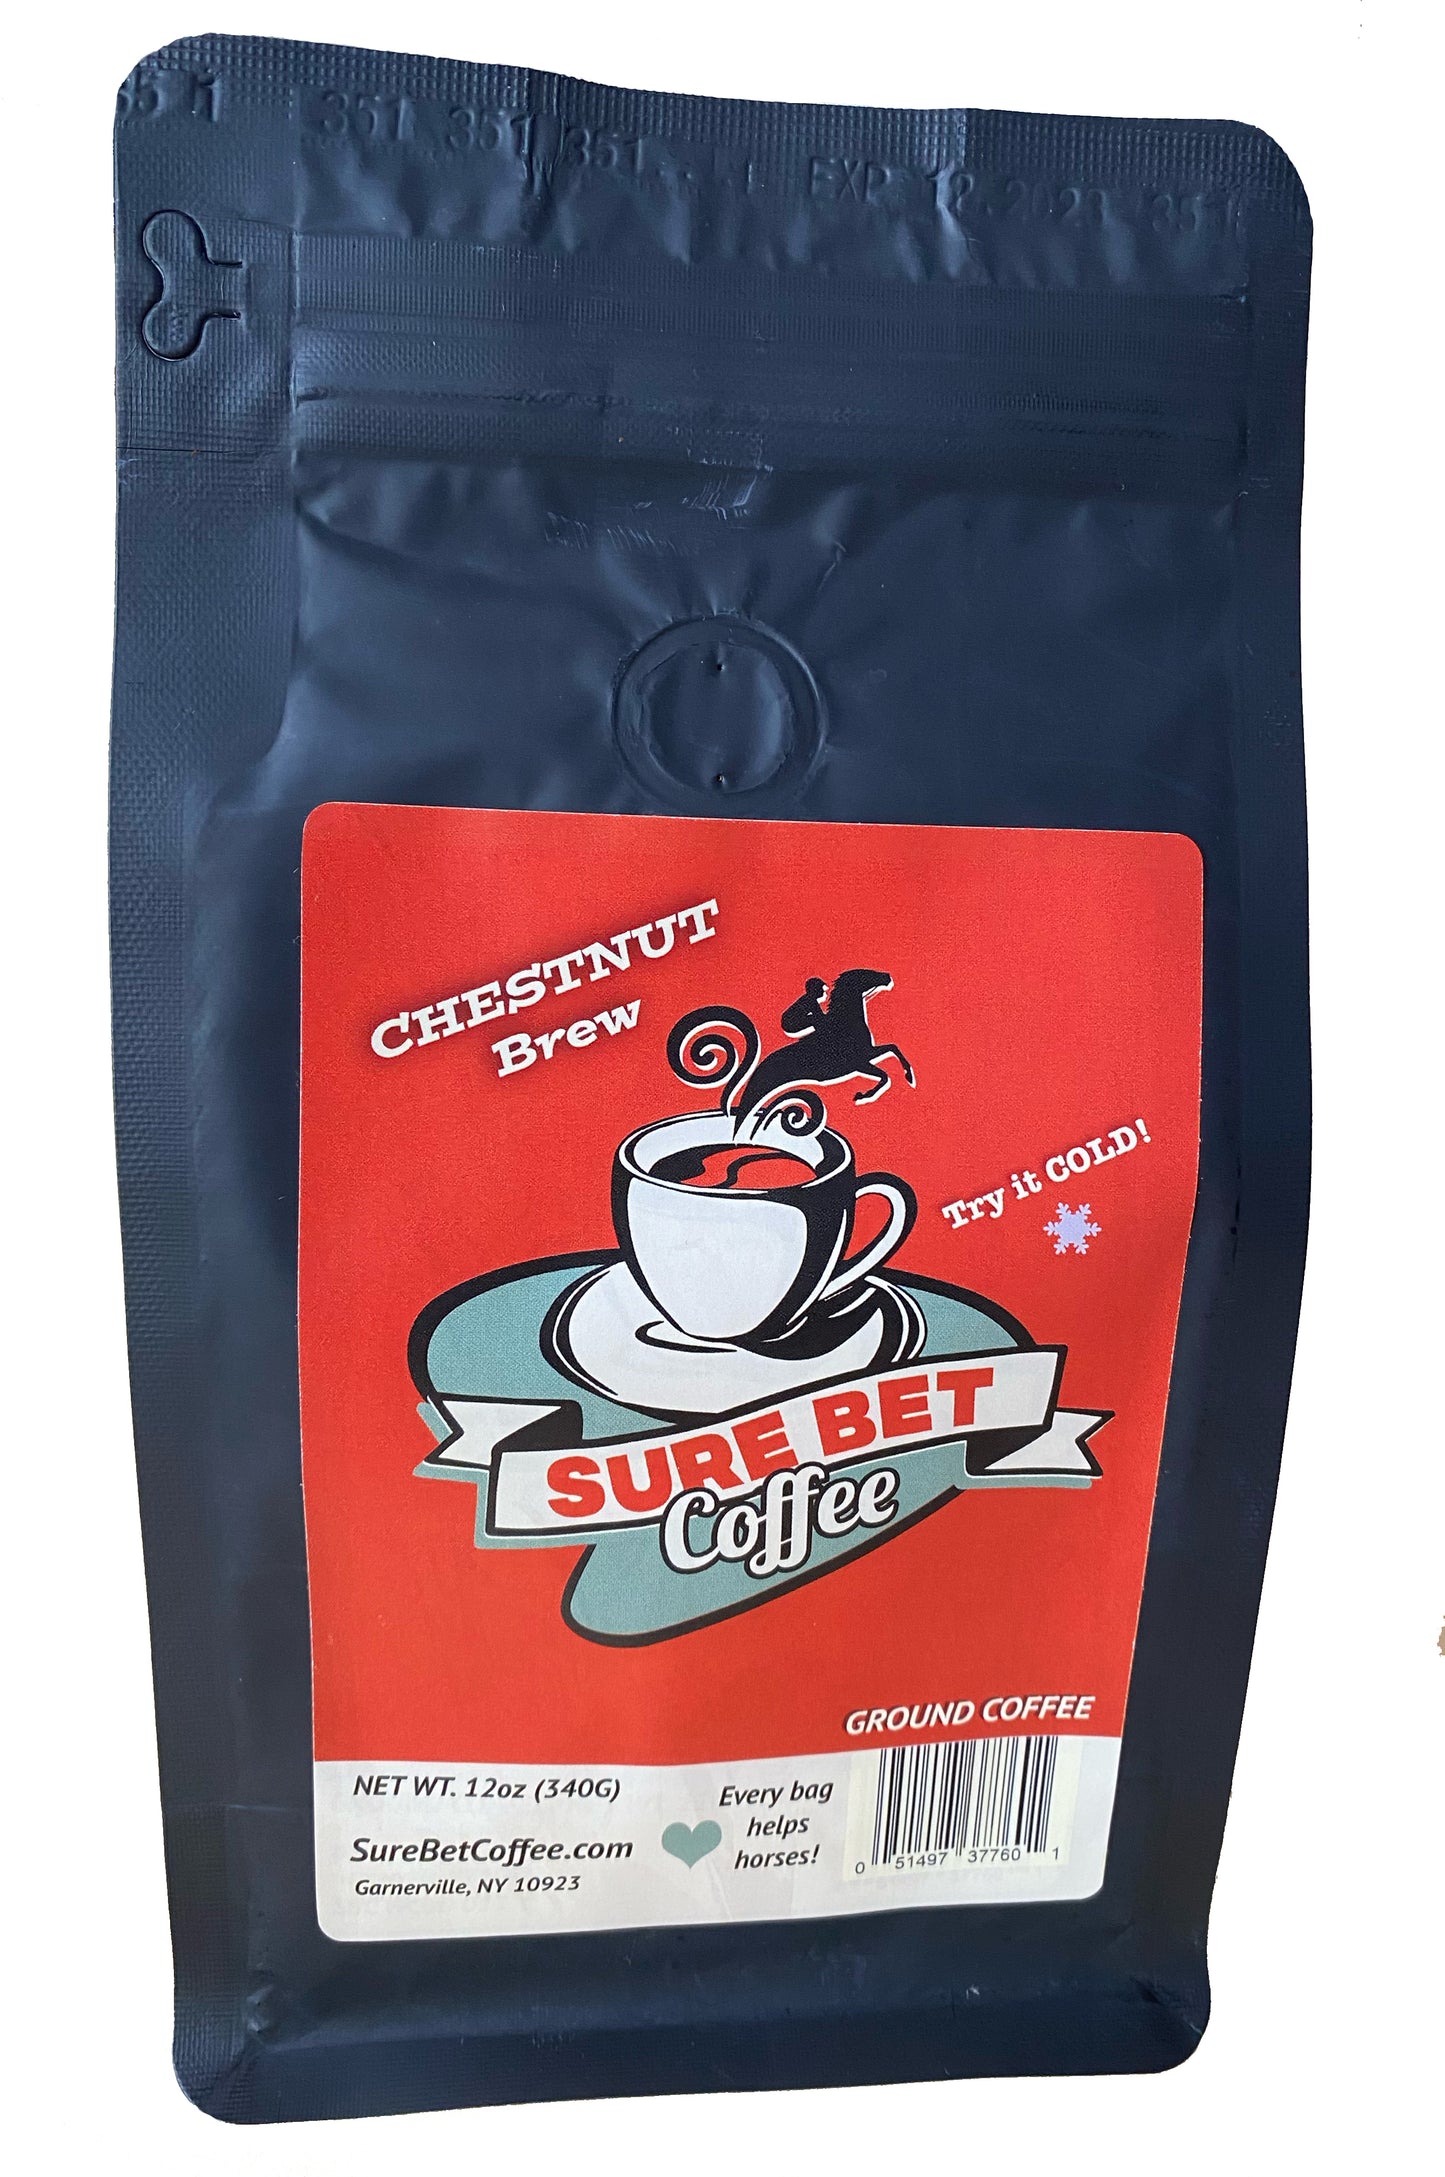 12 ounce bag of Sure Bet Coffee's Chestnut Brew, ground